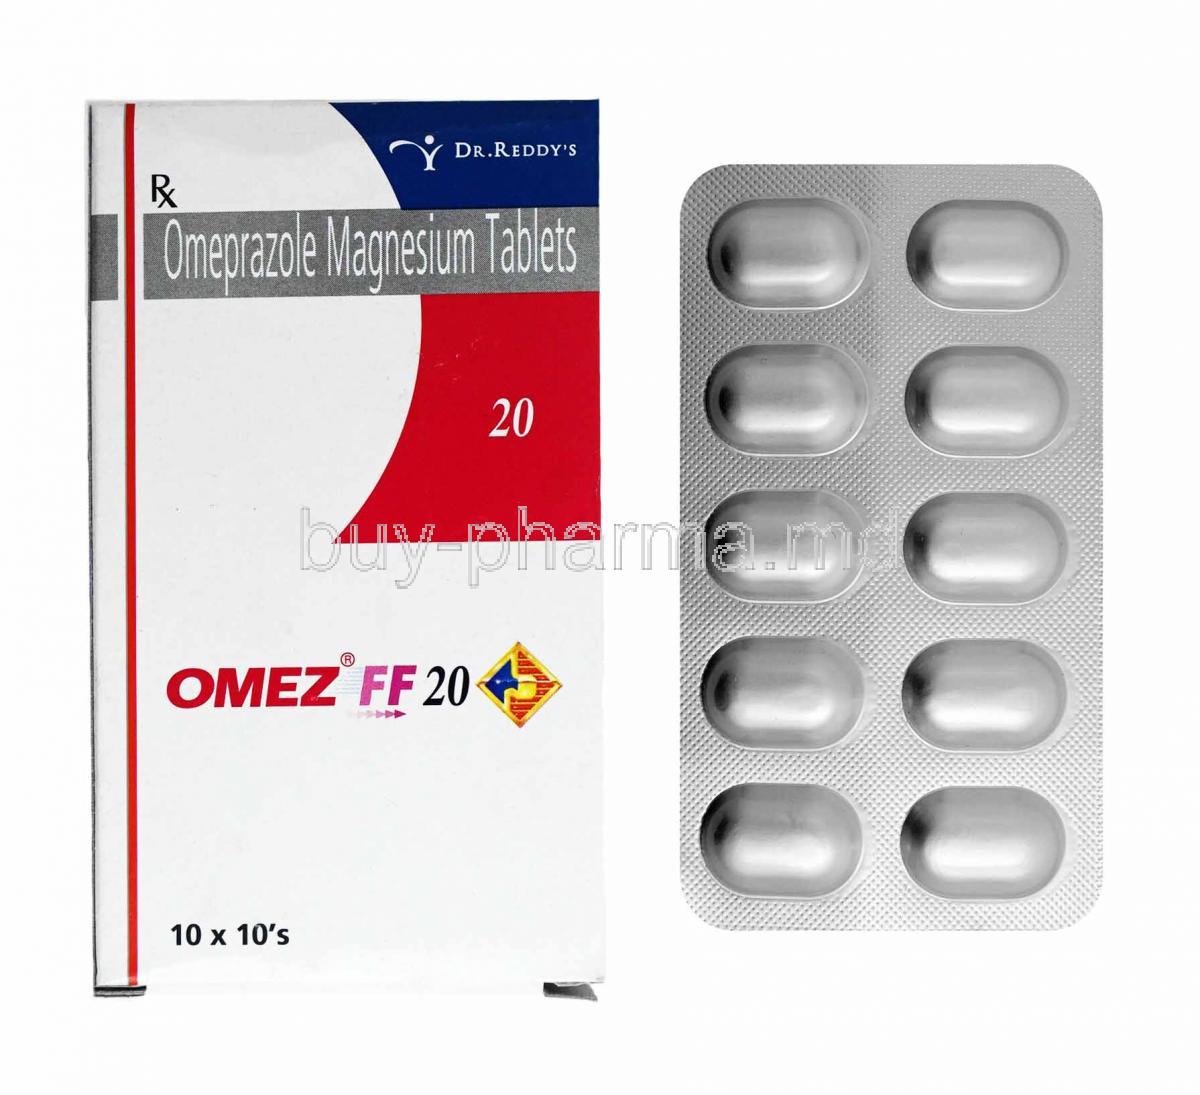 Omez FF, Omeprazole 20mg box and tablets